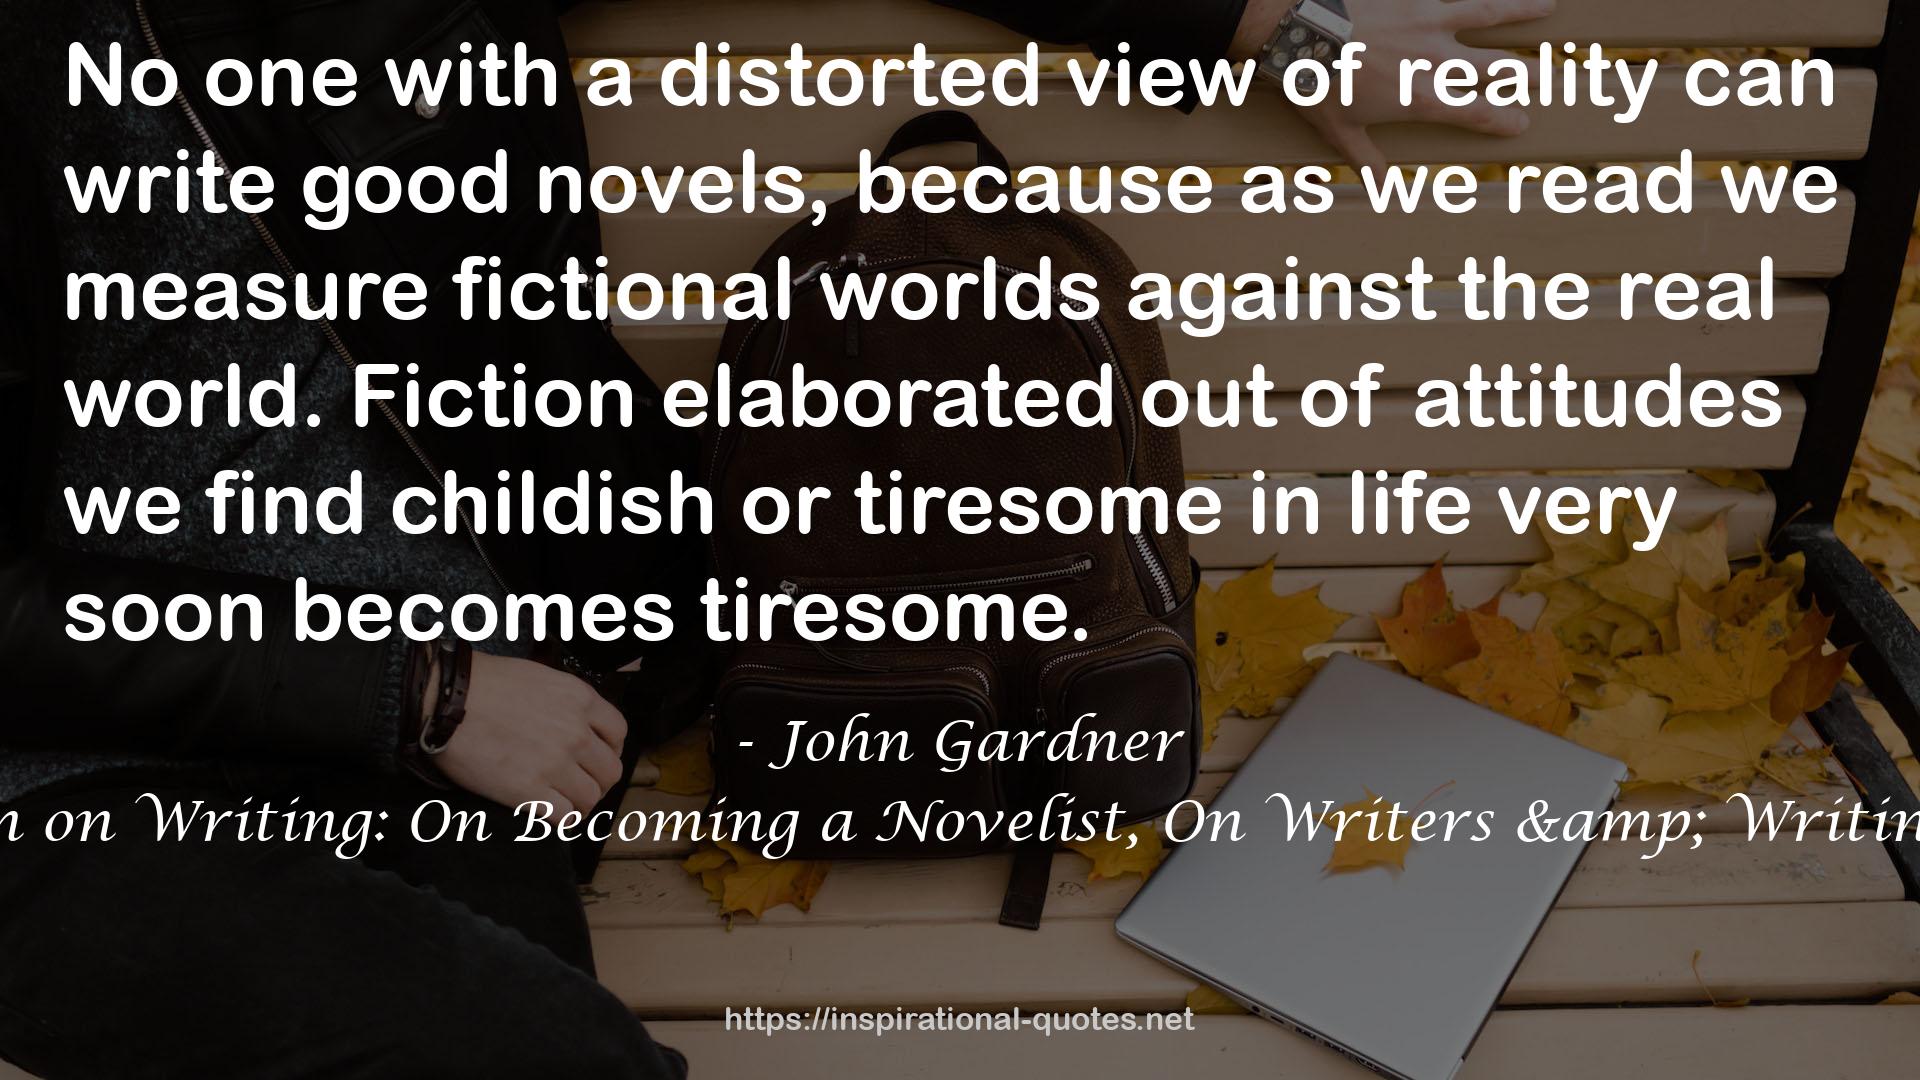 John Gardner's Collection on Writing: On Becoming a Novelist, On Writers & Writing, and On Moral Fiction QUOTES